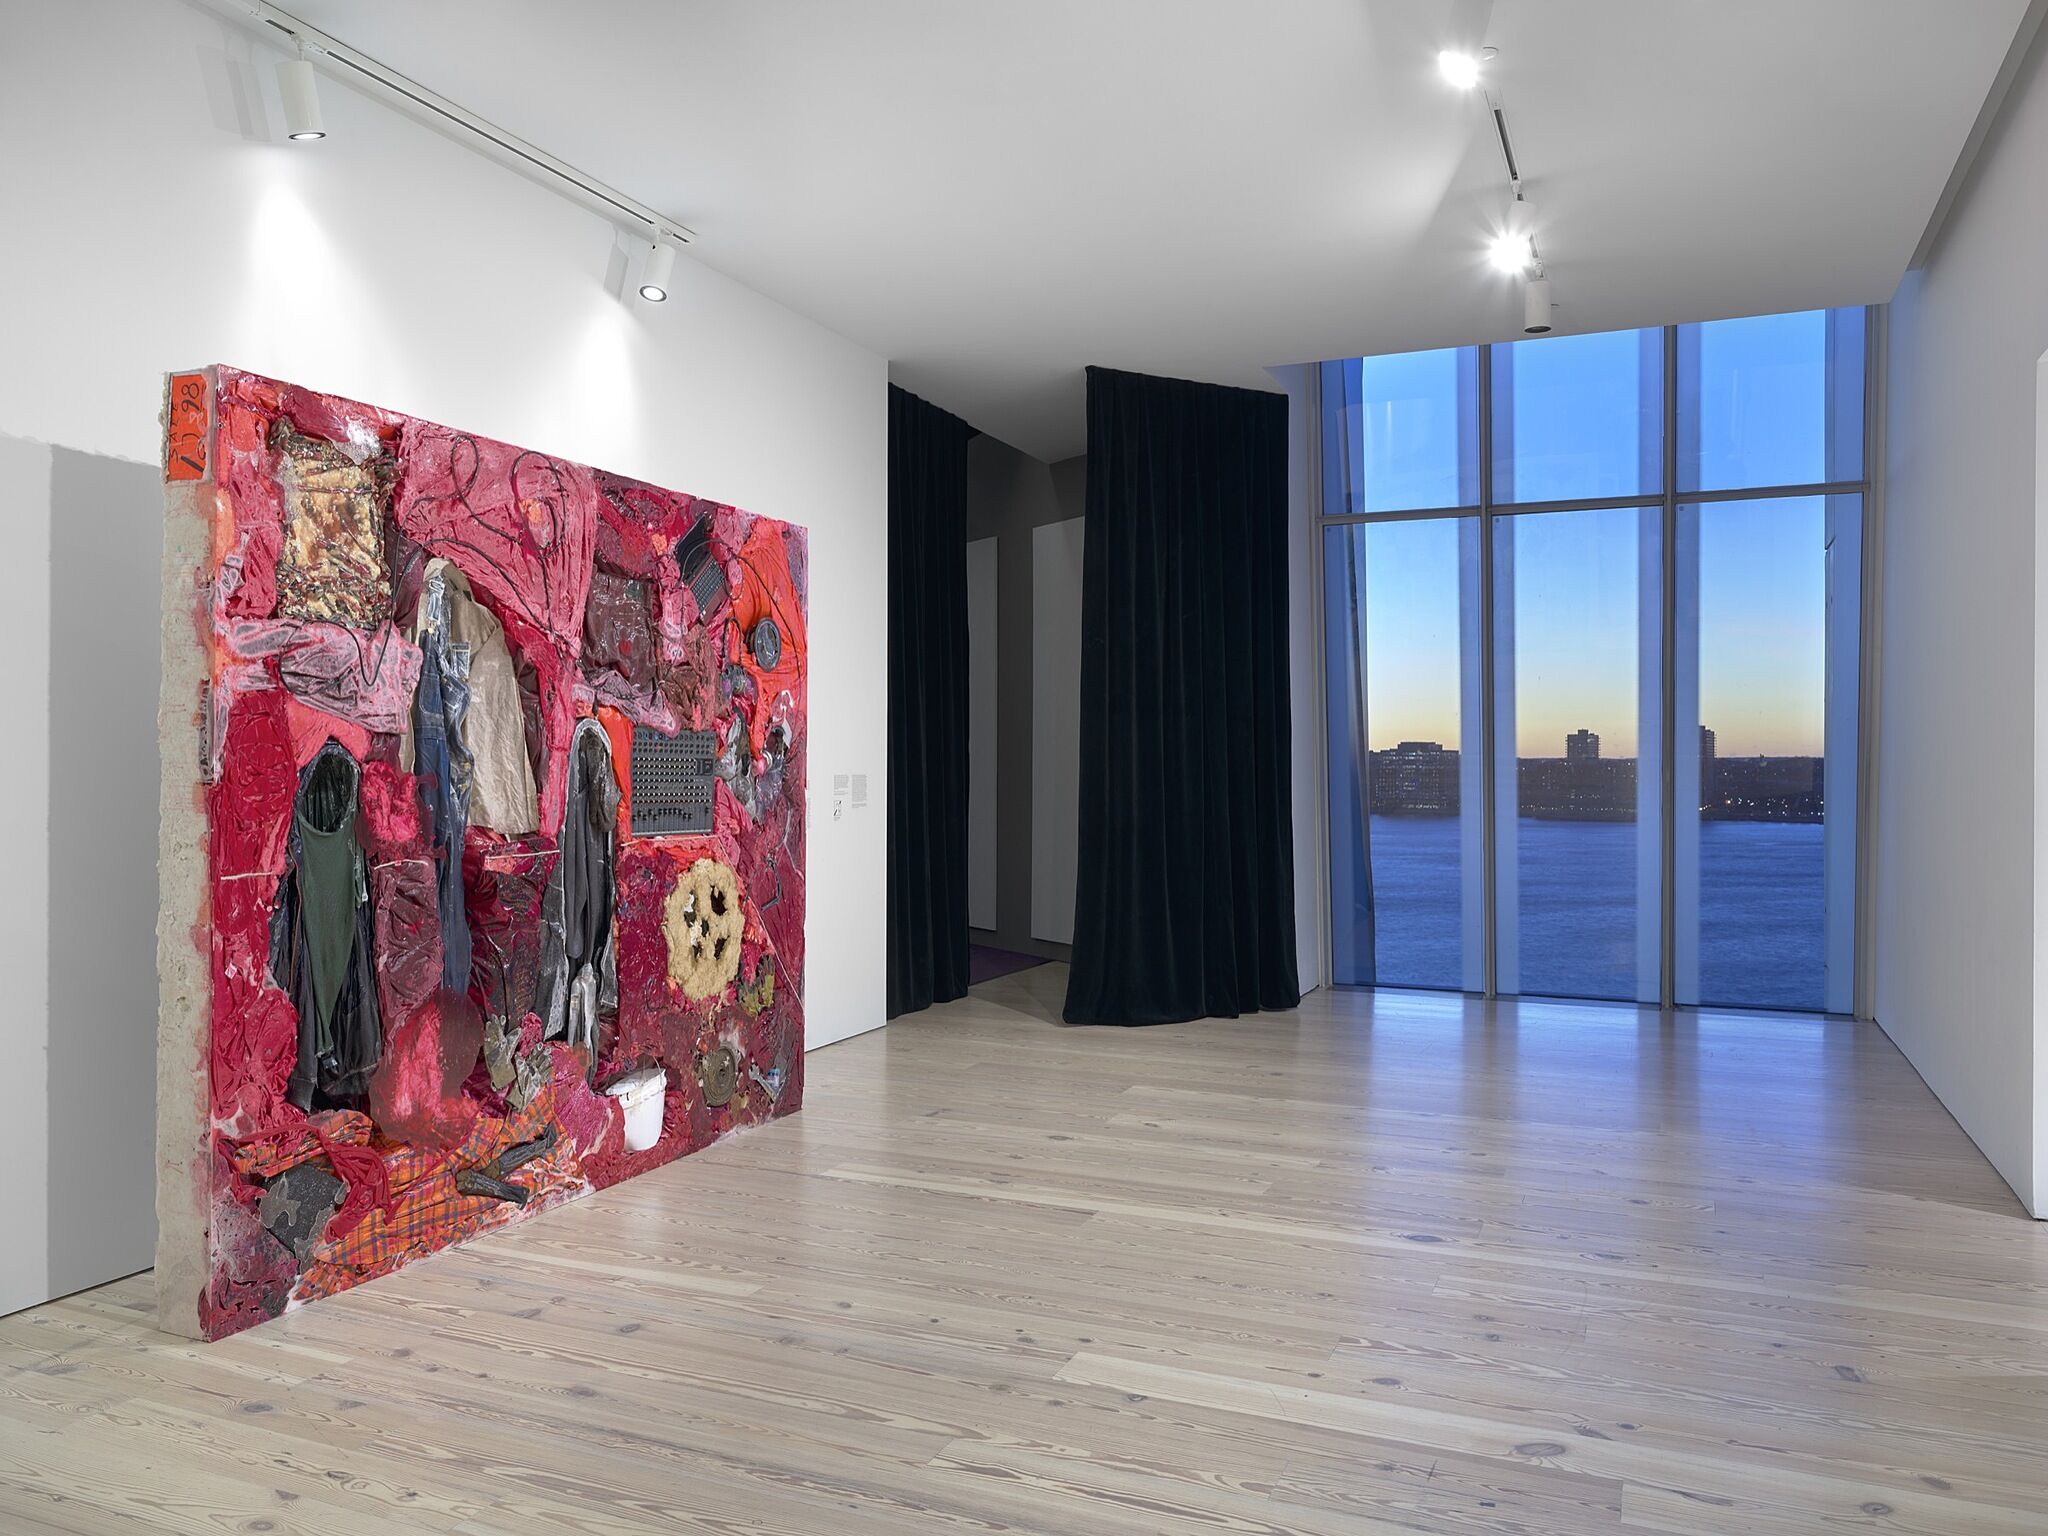 A large multi media artwork in a gallery with a window overlooking a river.